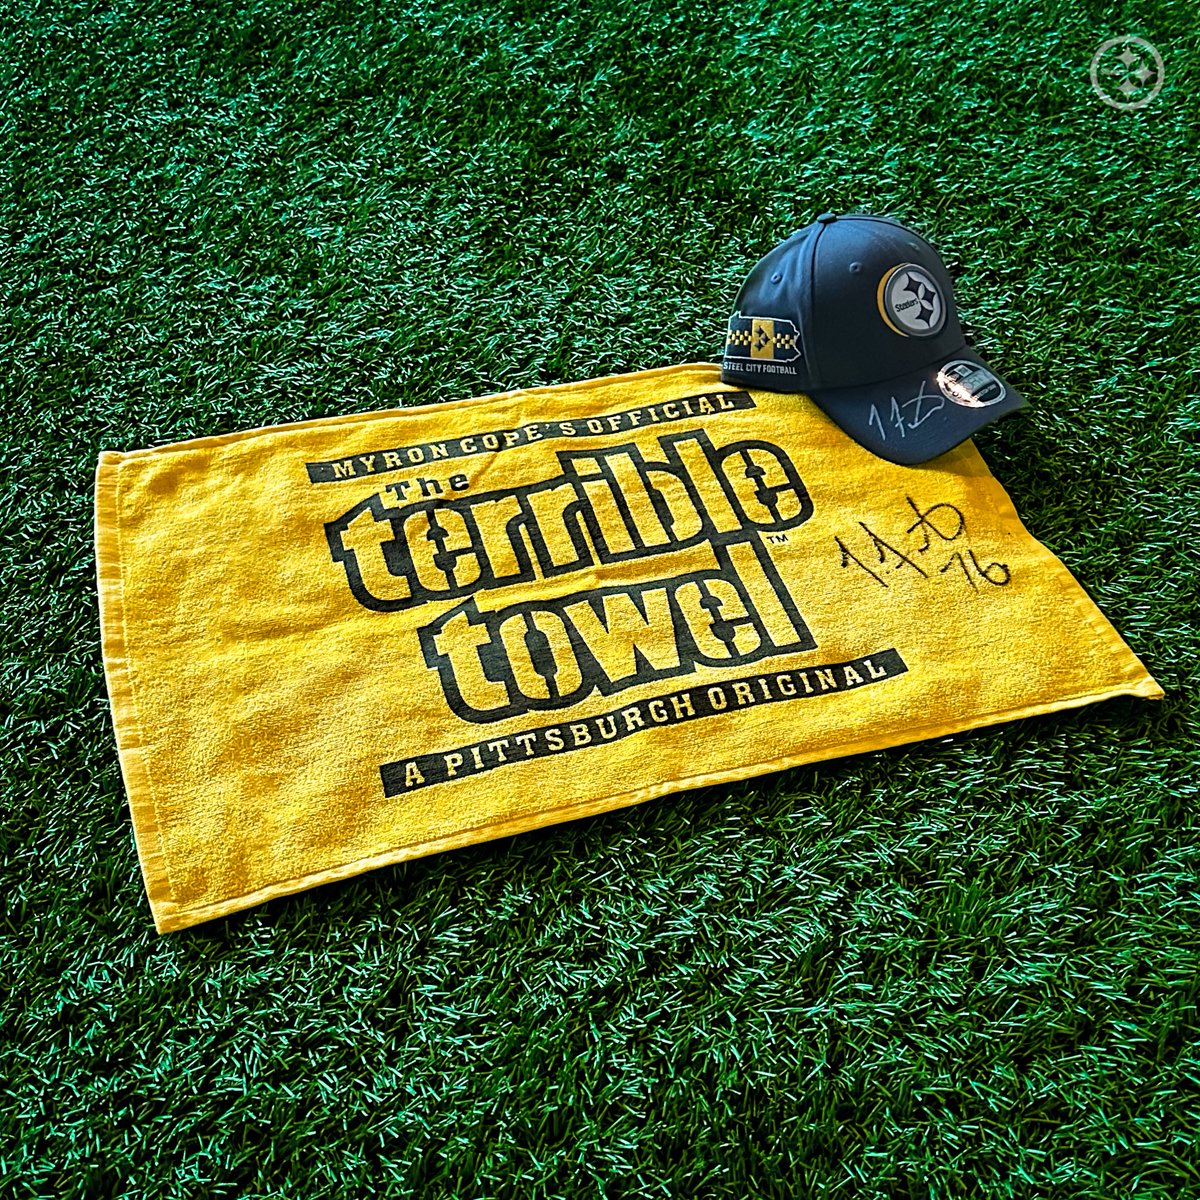 🚨 @tFautanu signed Terrible Towel AND Draft Hat giveaway 🚨 RP for your chance to win!